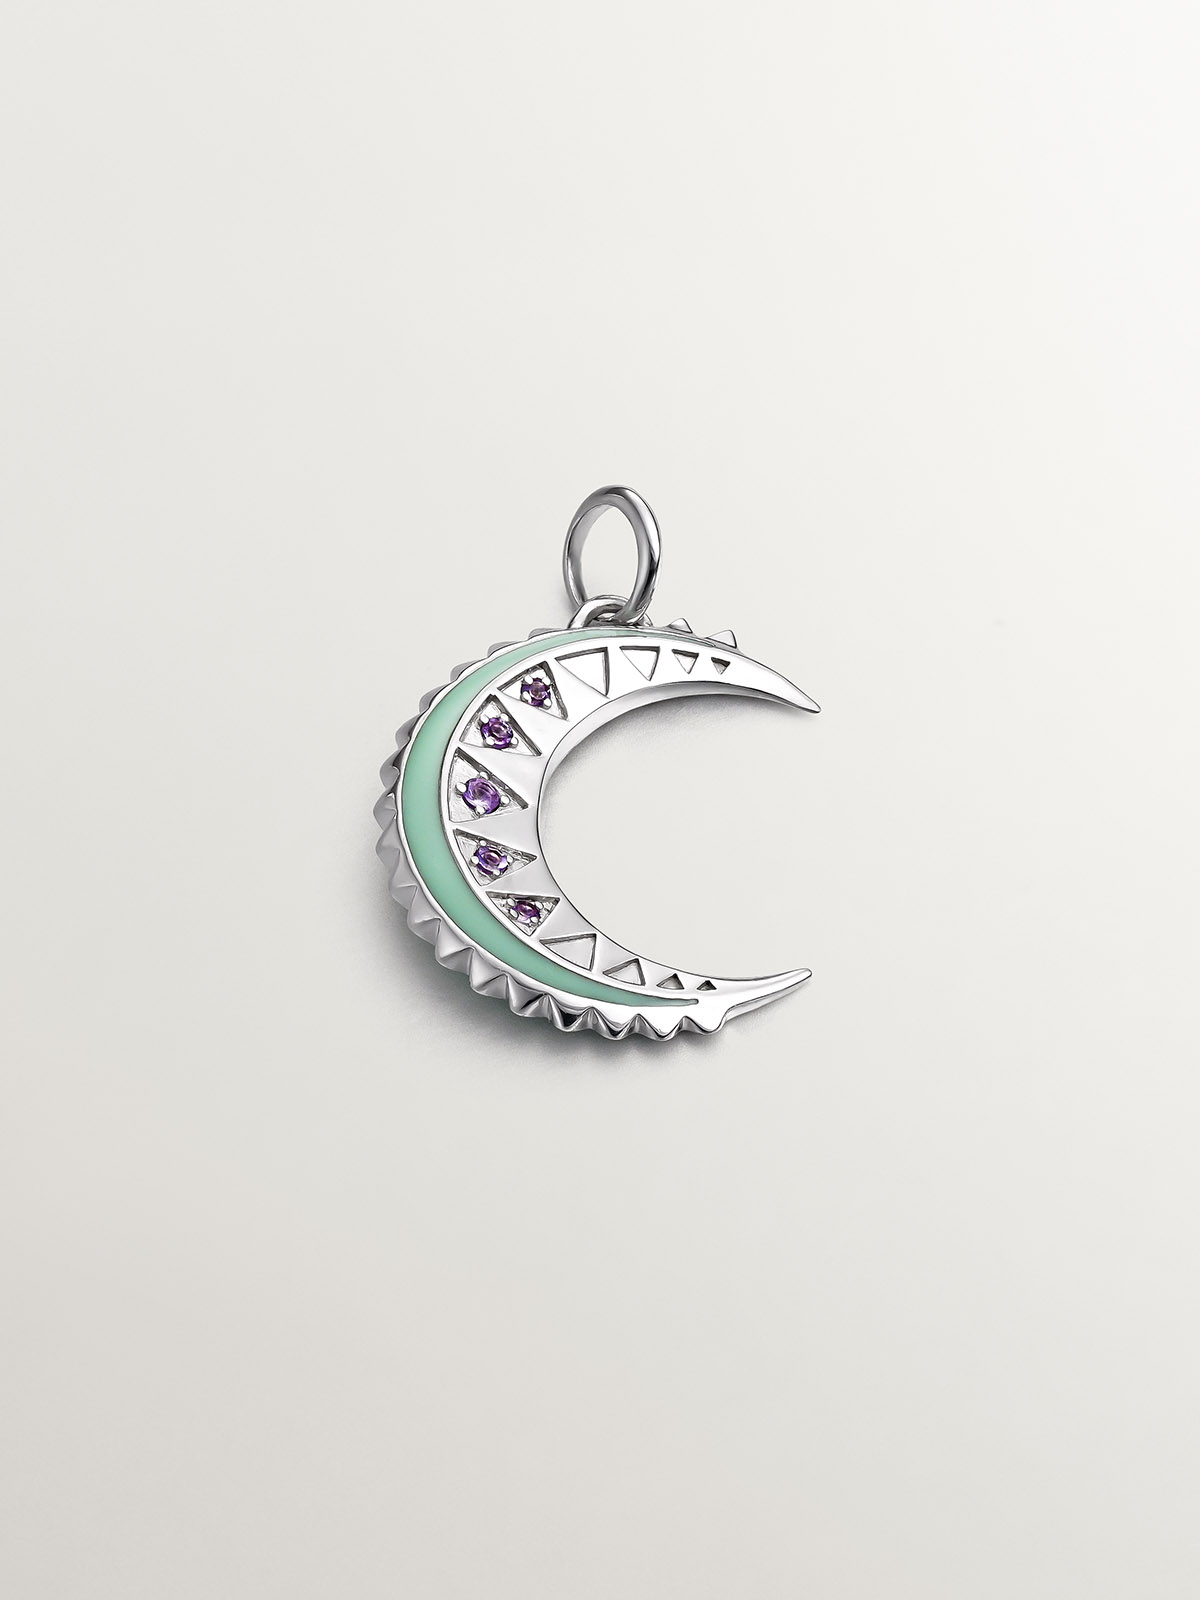 925 silver charm with purple ames, green enamel and moon shape